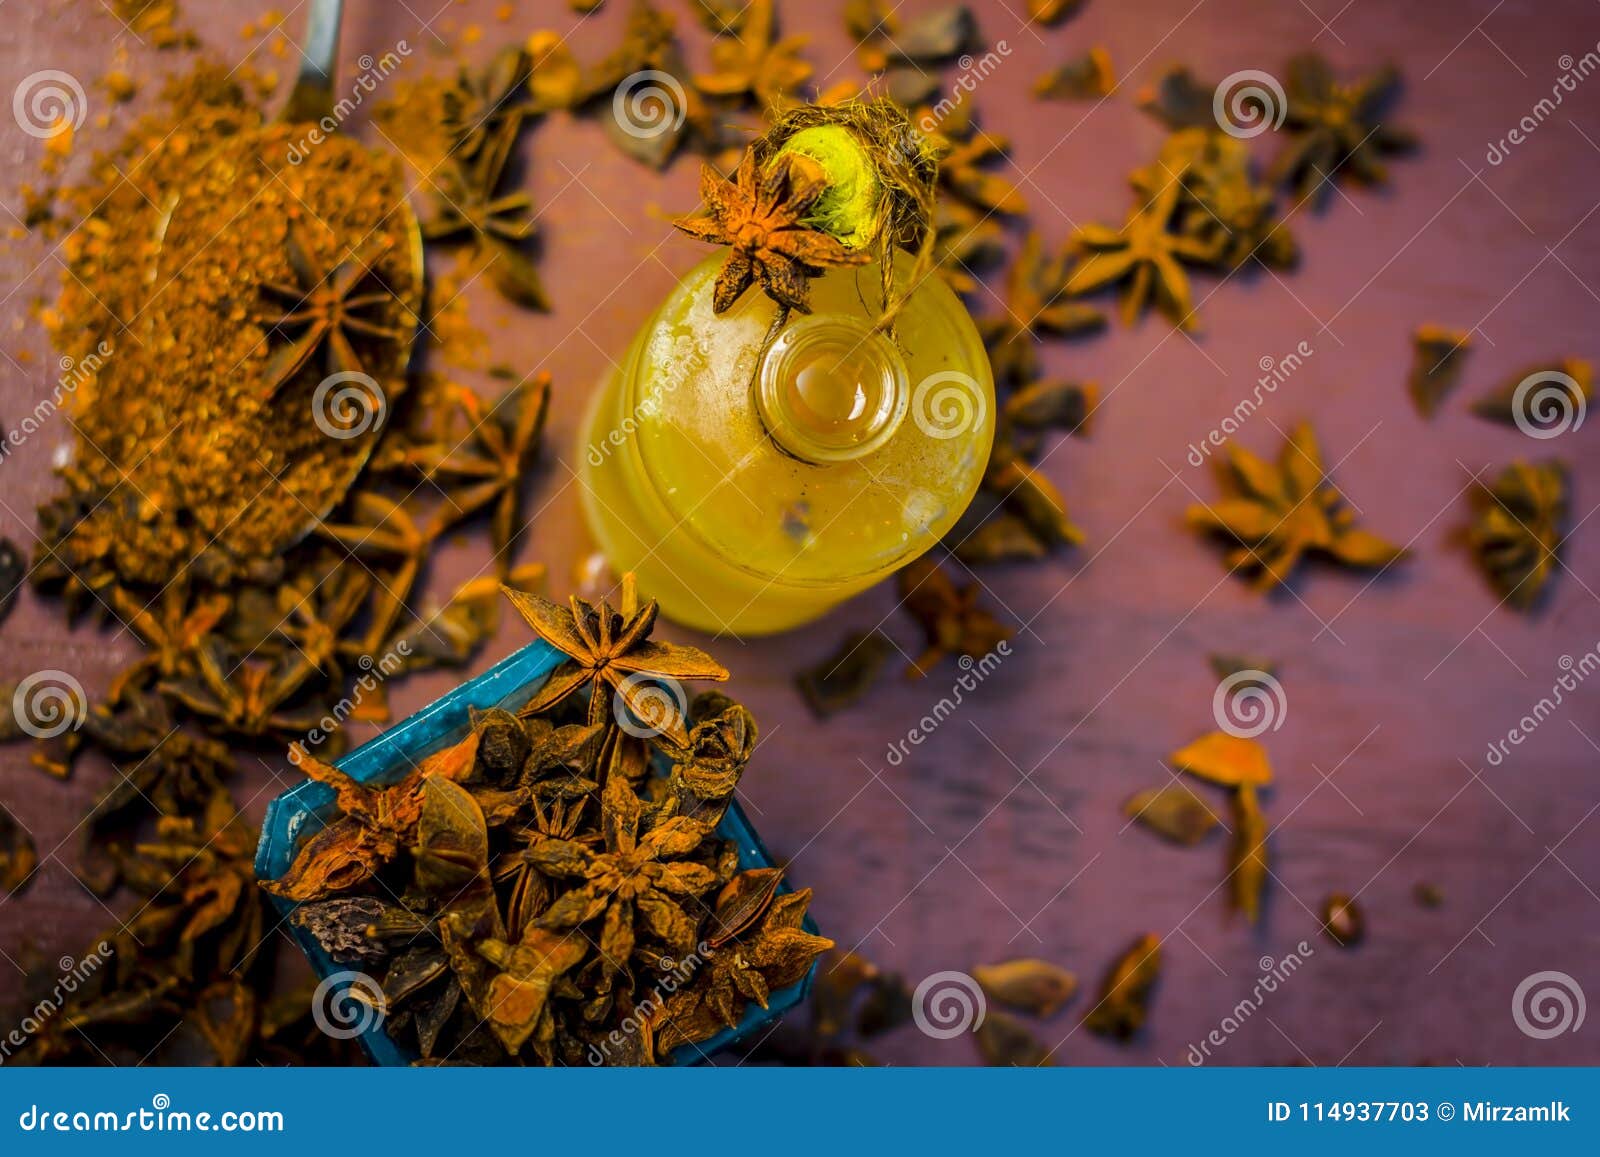 Oil of Star Anise in a Bottle with Raw Anise. Stock Image - Image of ...